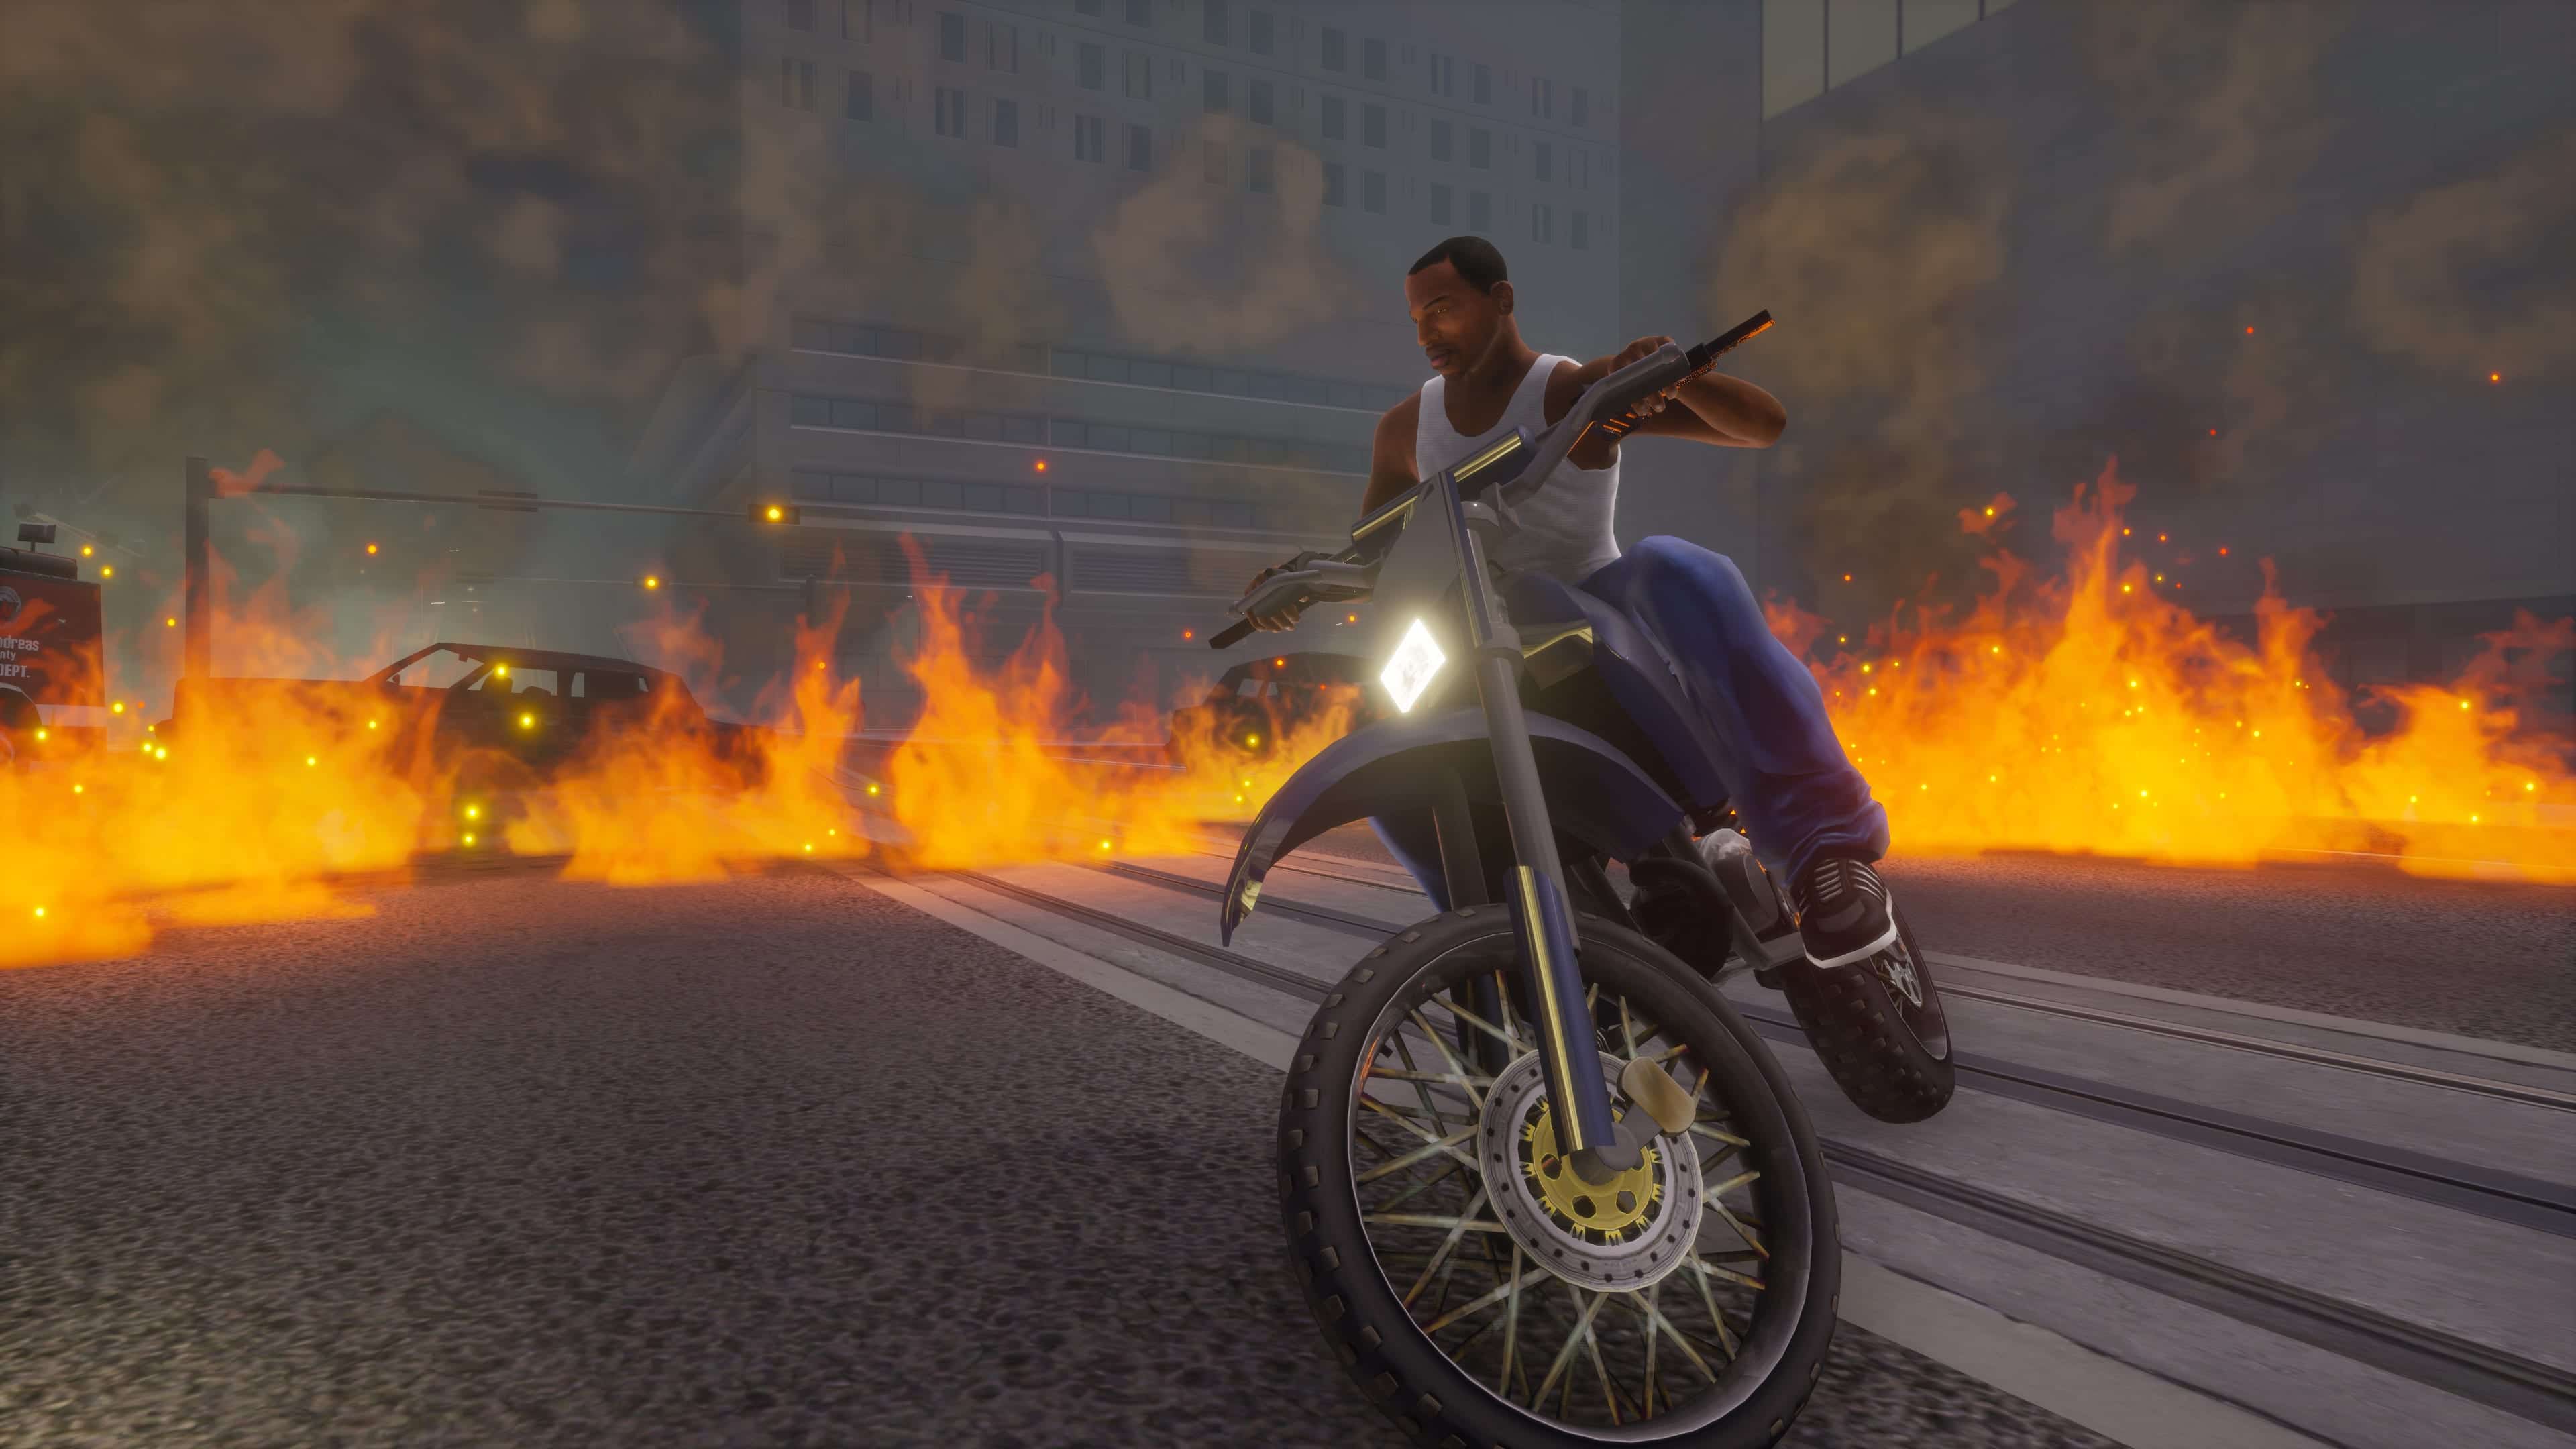 GTA san andreas – the Definitive Edition update 1.04